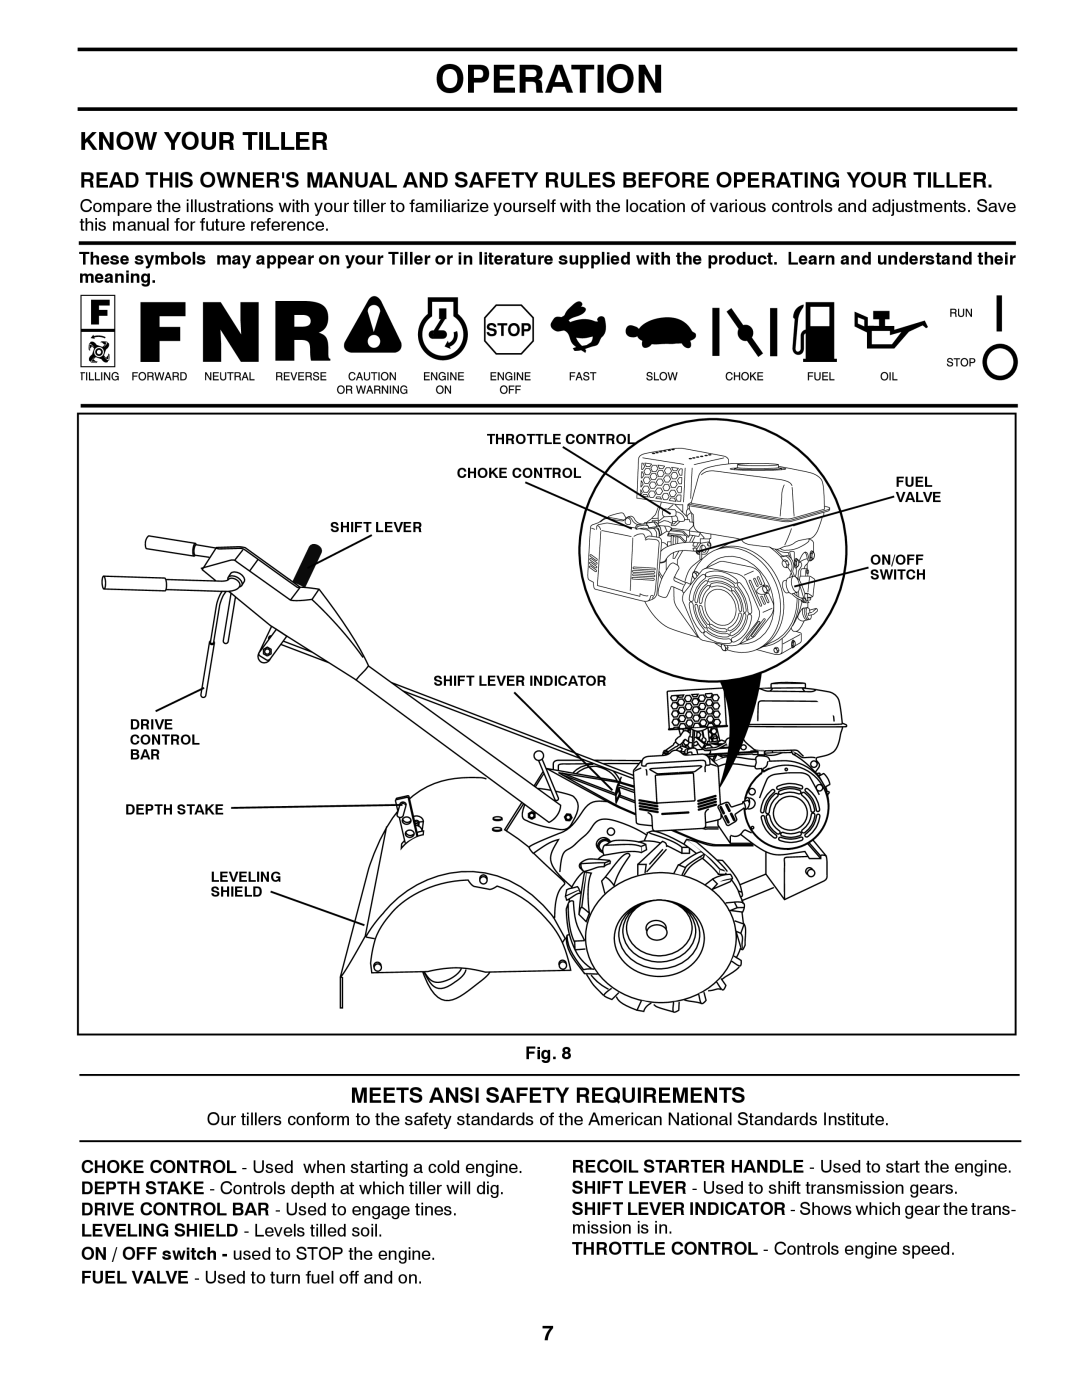 Poulan PRRT900 manual Operation, Know Your Tiller, Read This Owners Manual And Safety Rules Before Operating Your Tiller 